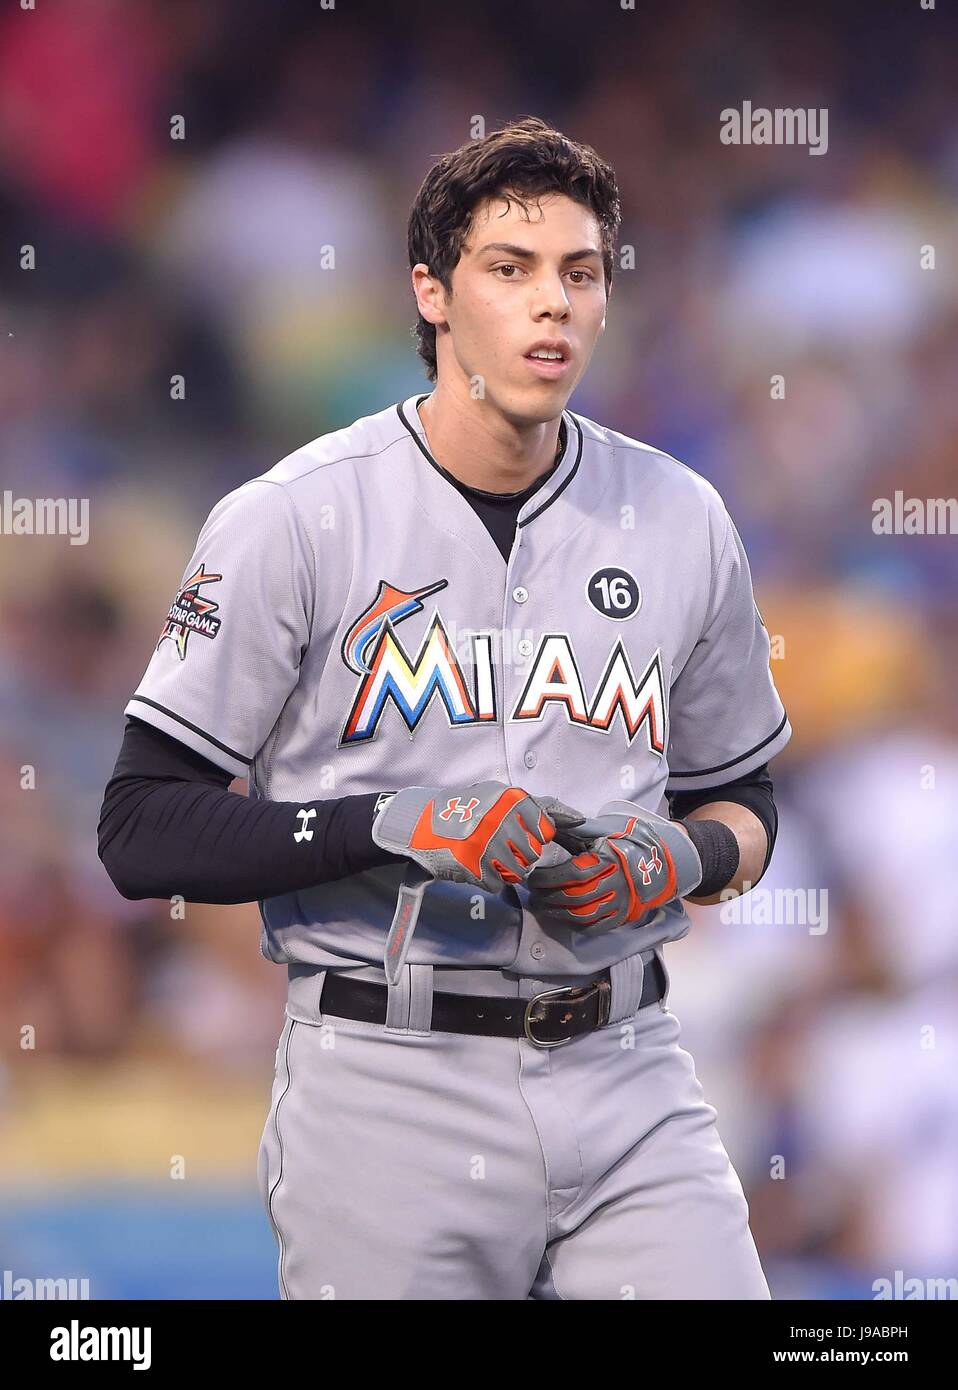 Marlins surprise Christian Yelich with lookalike from 'SNL